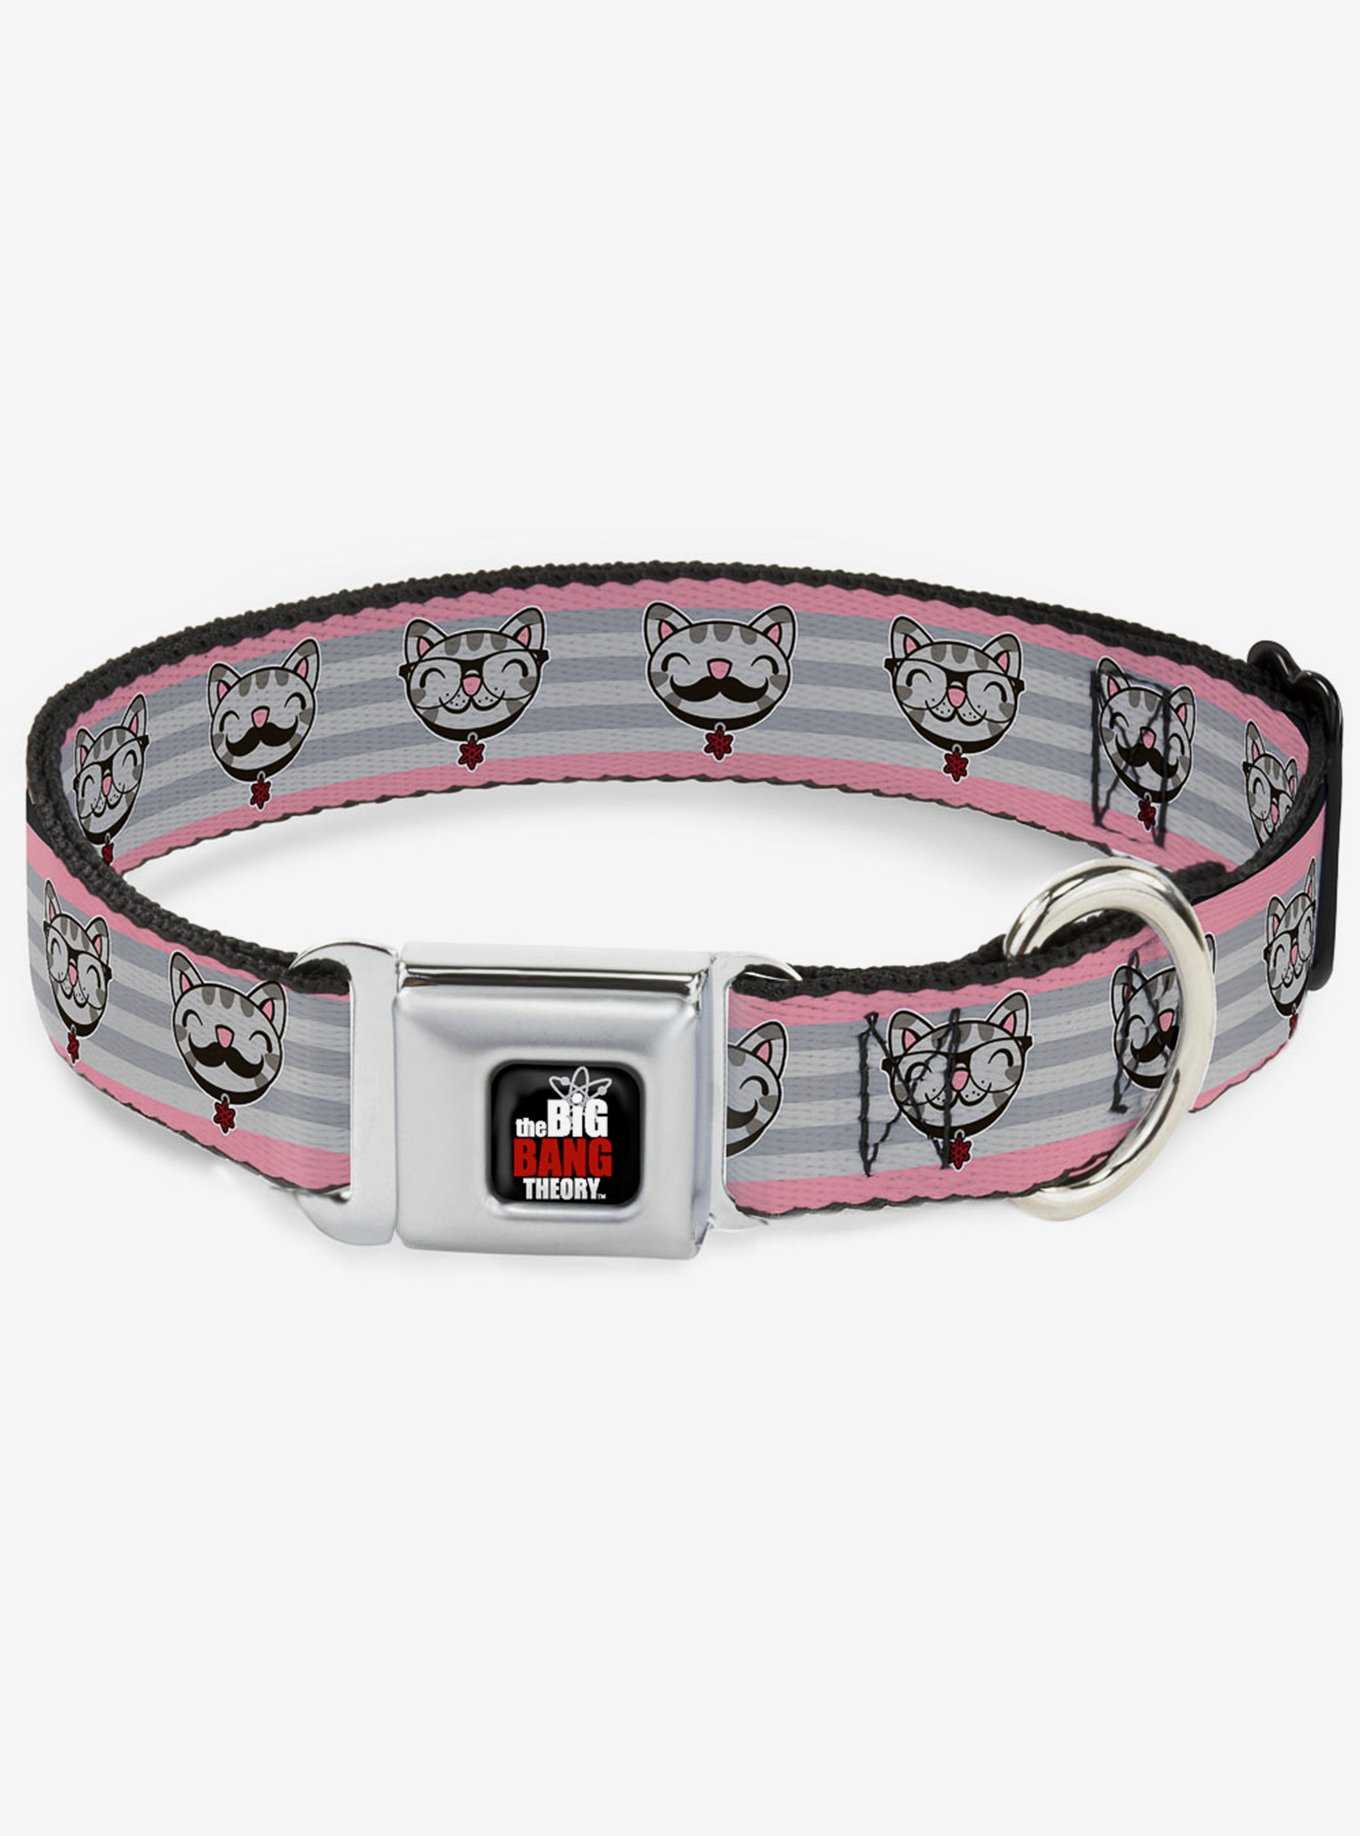 The Big Bang Theory Soft Kitty Nerd Mustacho Expressions Seatbelt Buckle Dog Collar, , hi-res